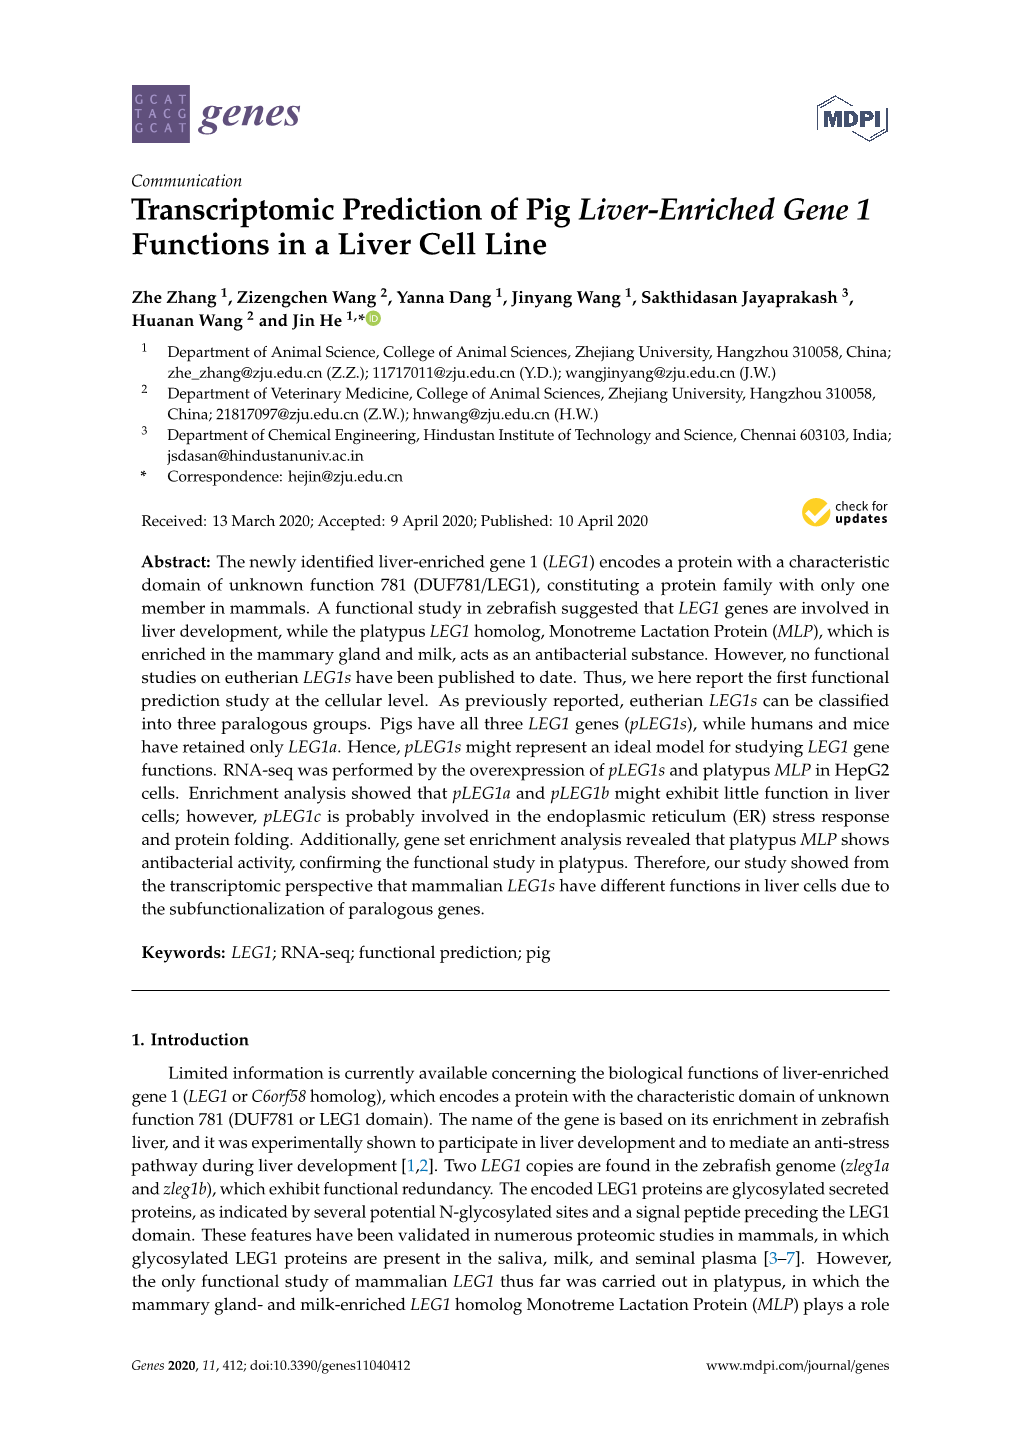 Transcriptomic Prediction of Pig Liver-Enriched Gene 1 Functions in a Liver Cell Line